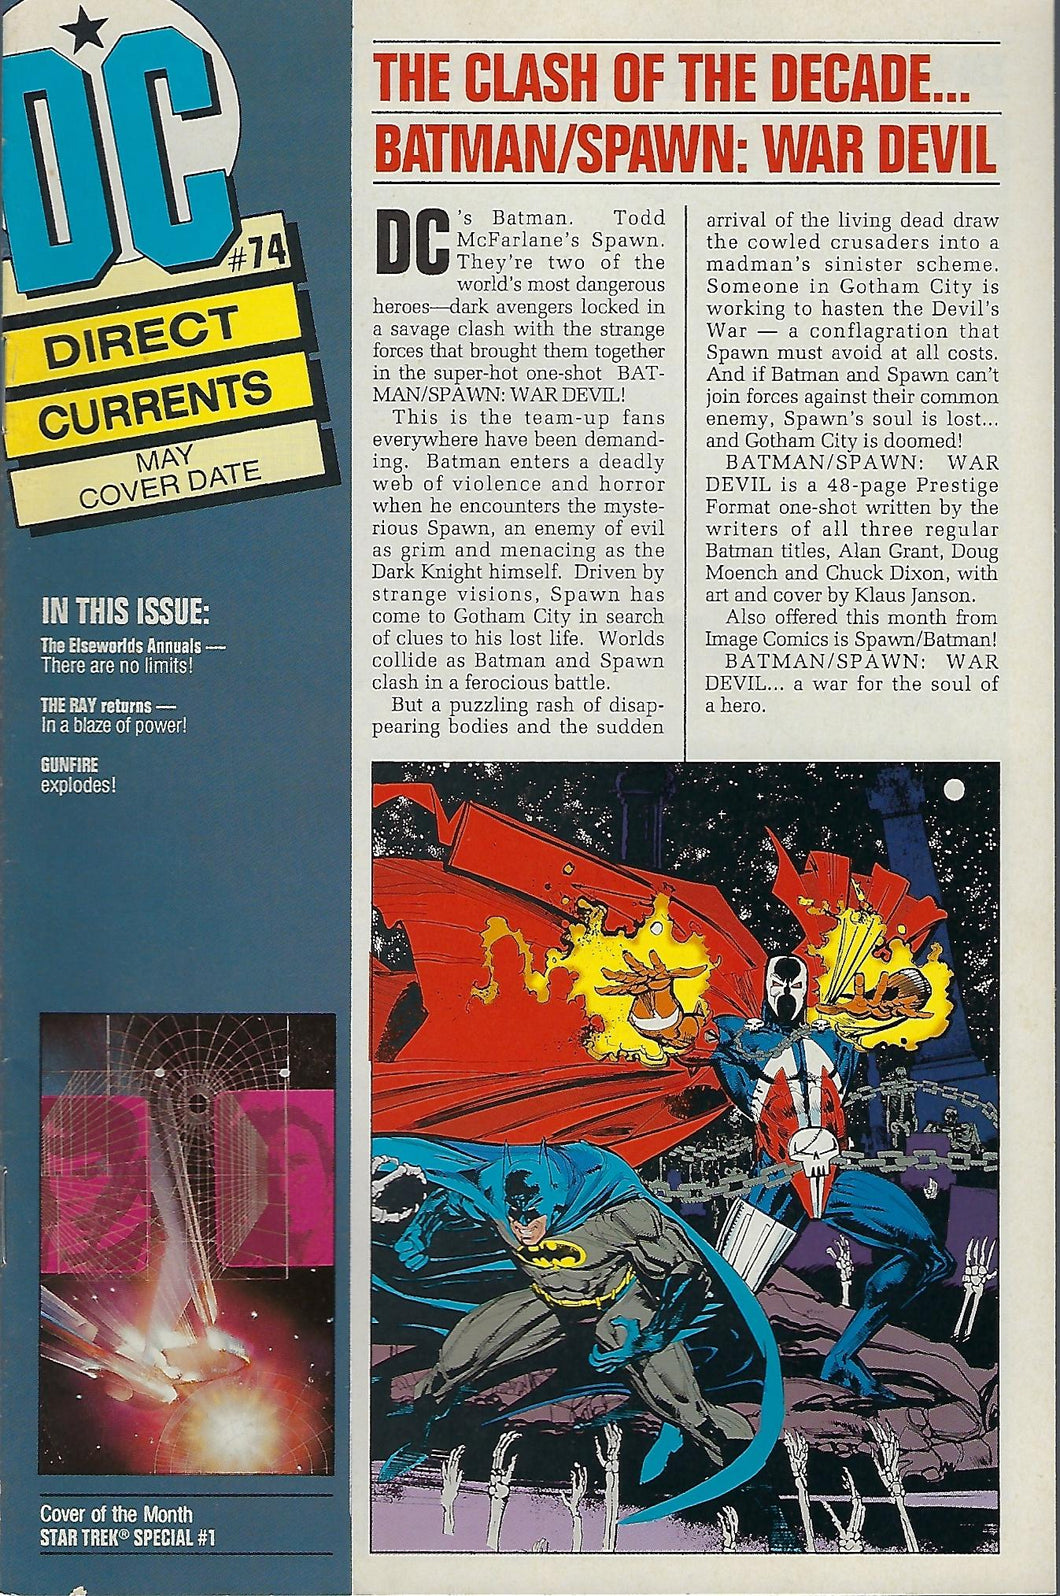 DC Direct Currents # 74 !!!  VF+